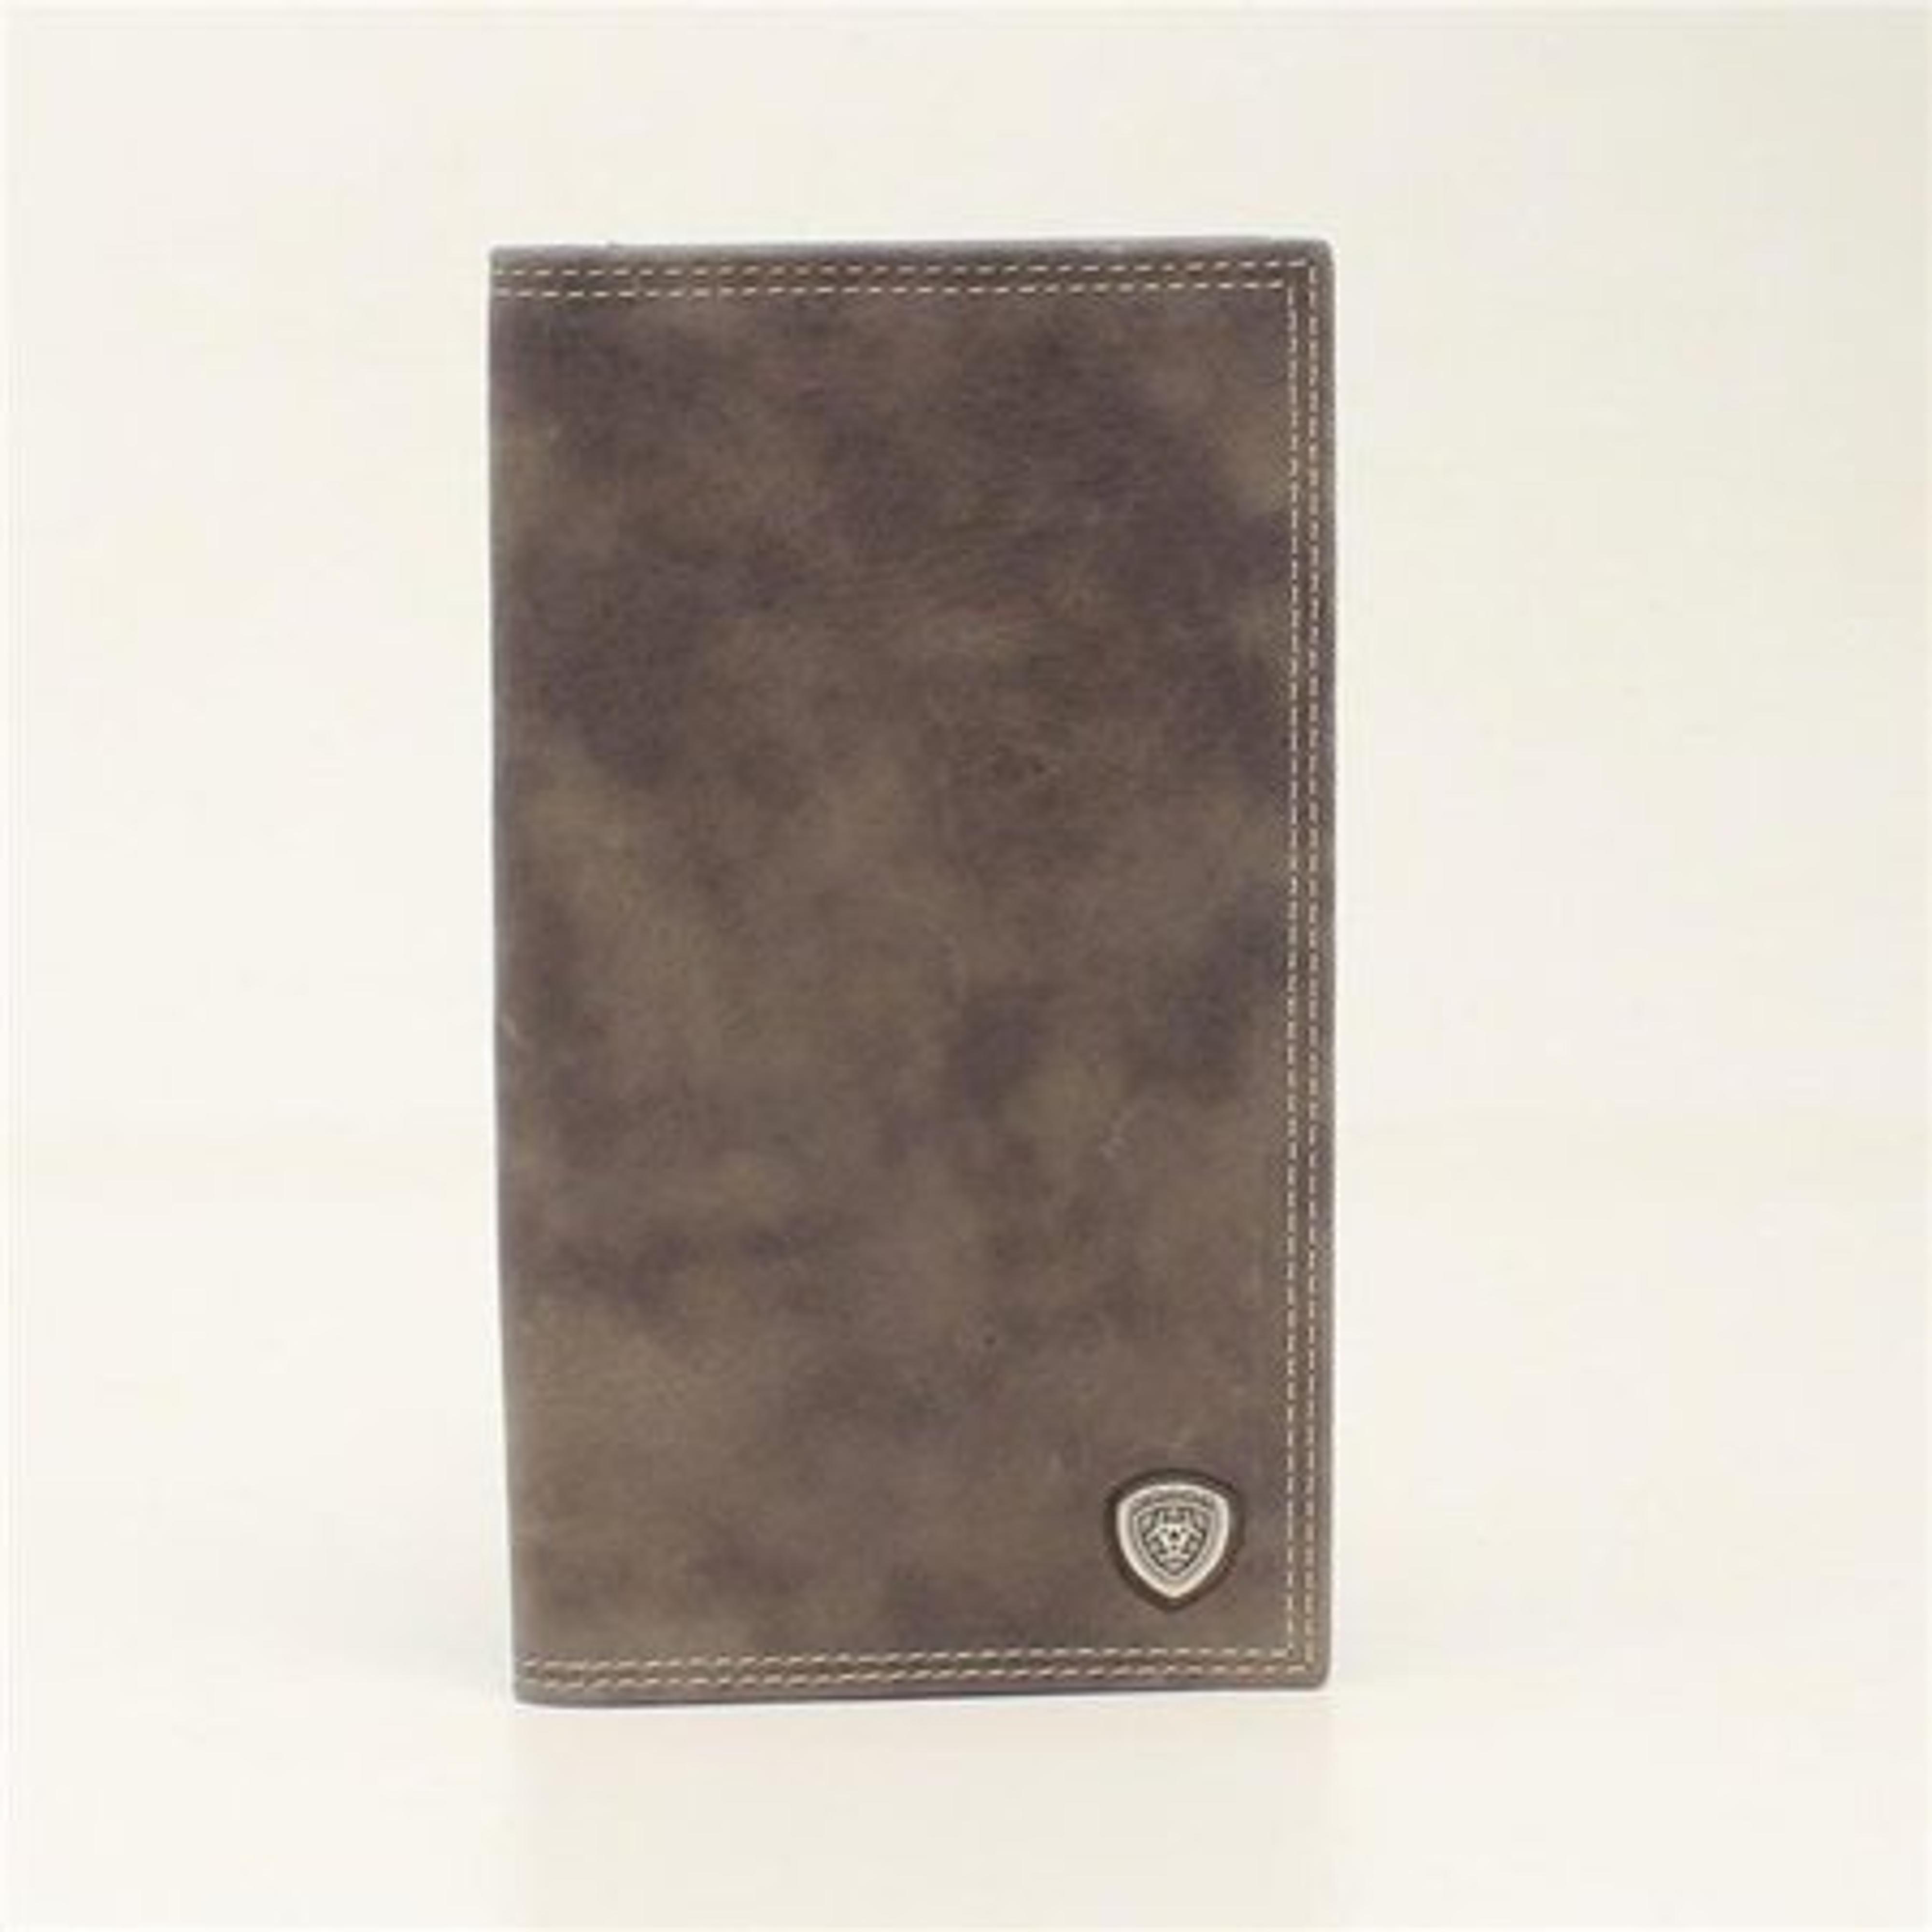  Rodeo Wallet/Checkbook Cover